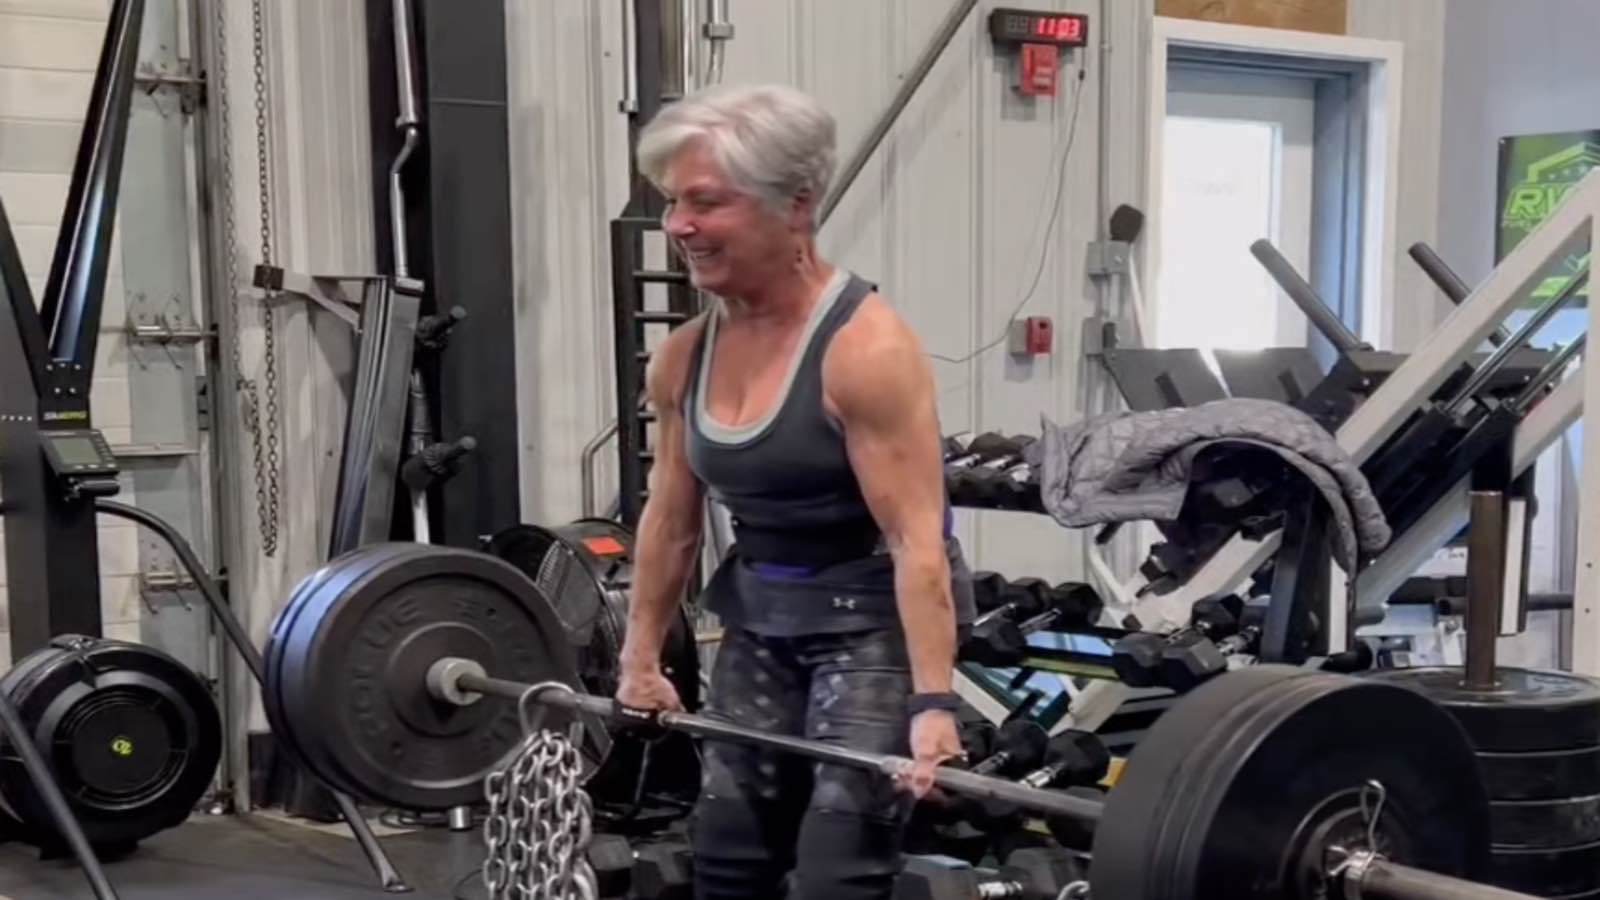 73-year-old-powerlifter-mary-duffy-deadlifts-nearly-triple-bodyweight-—-140.6-kilograms-(310-pounds)-with-chains-–-breaking-muscle